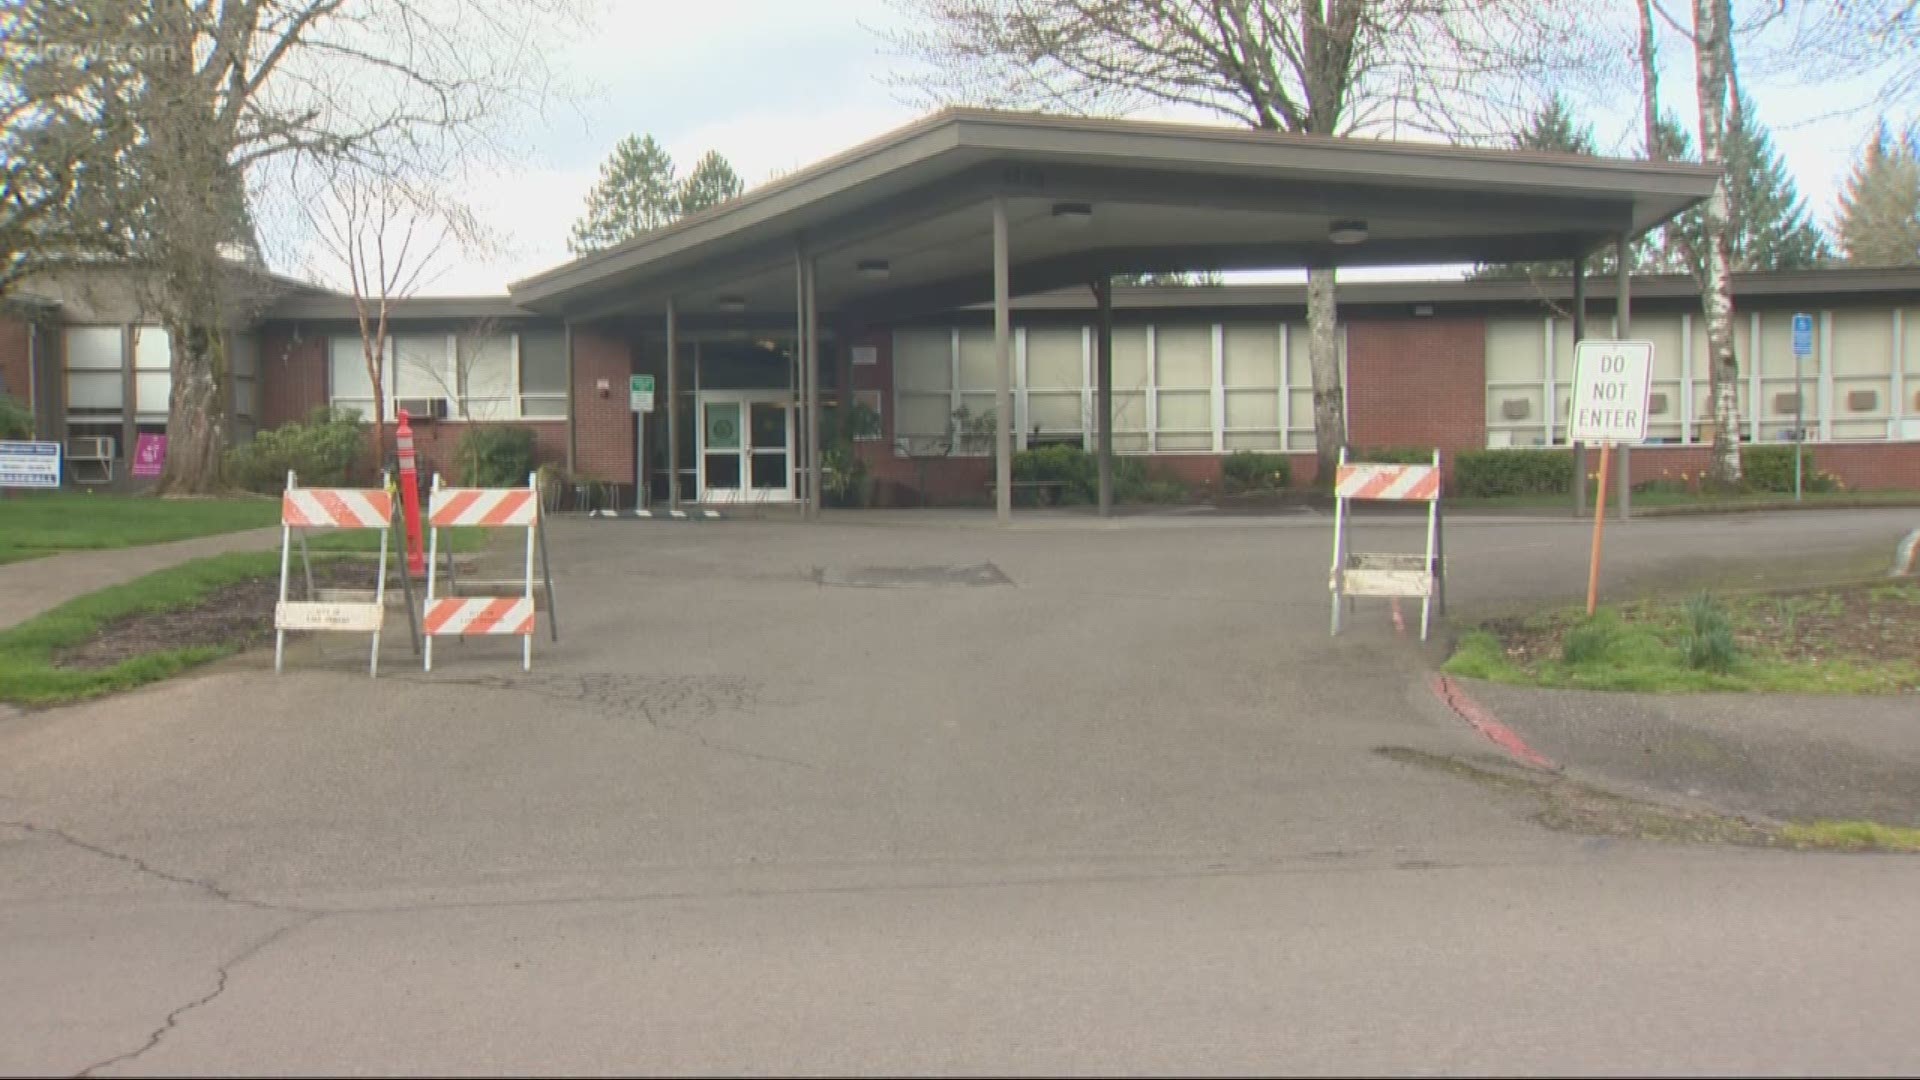 The second person to test presumptive positive was a household contact of the Forest Hills Elementary School employee who tested positive on Friday.